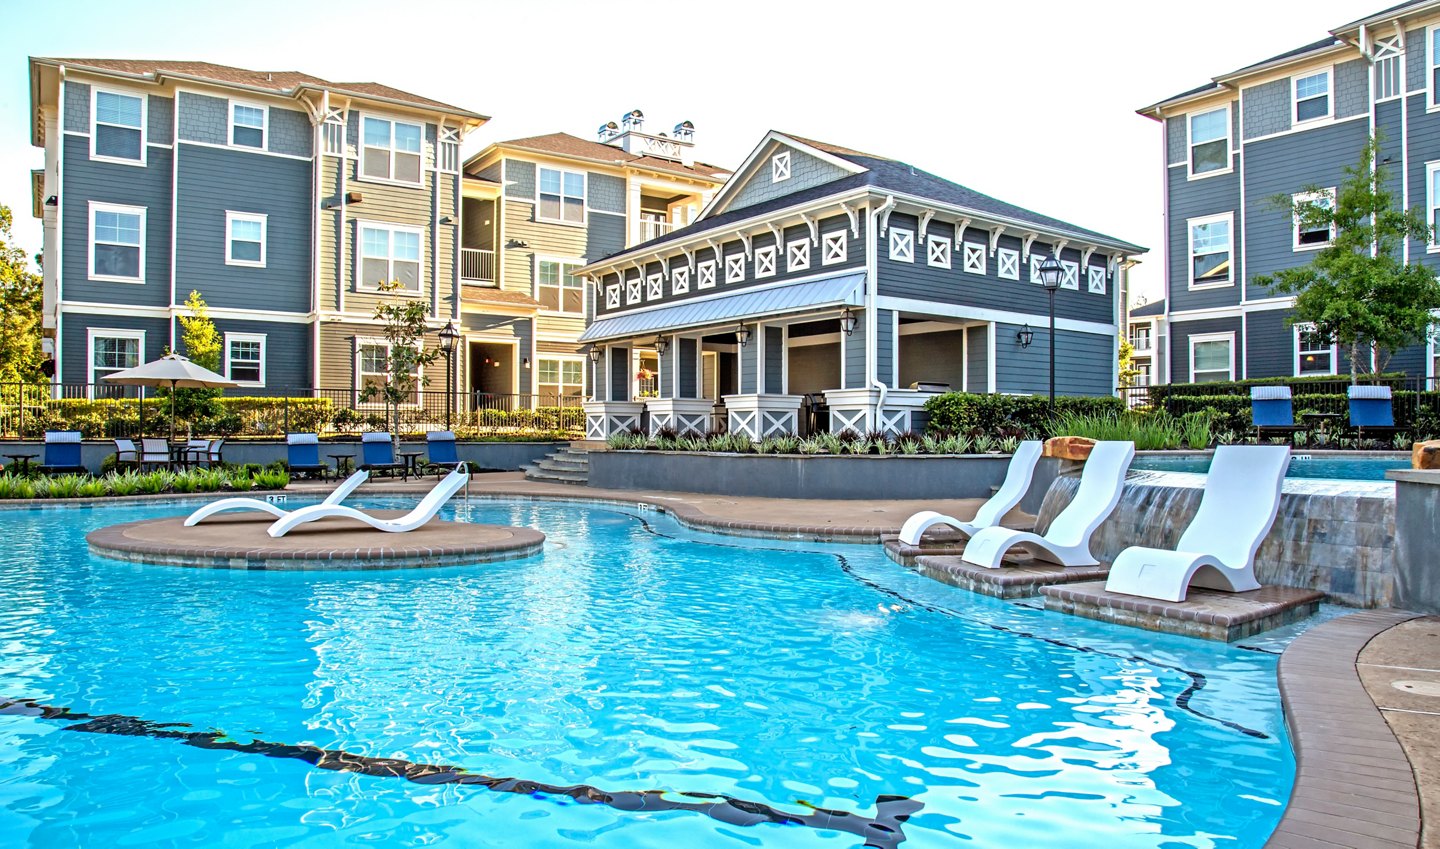 The Woodlands Lodge - Apartments in The Woodlands, TX